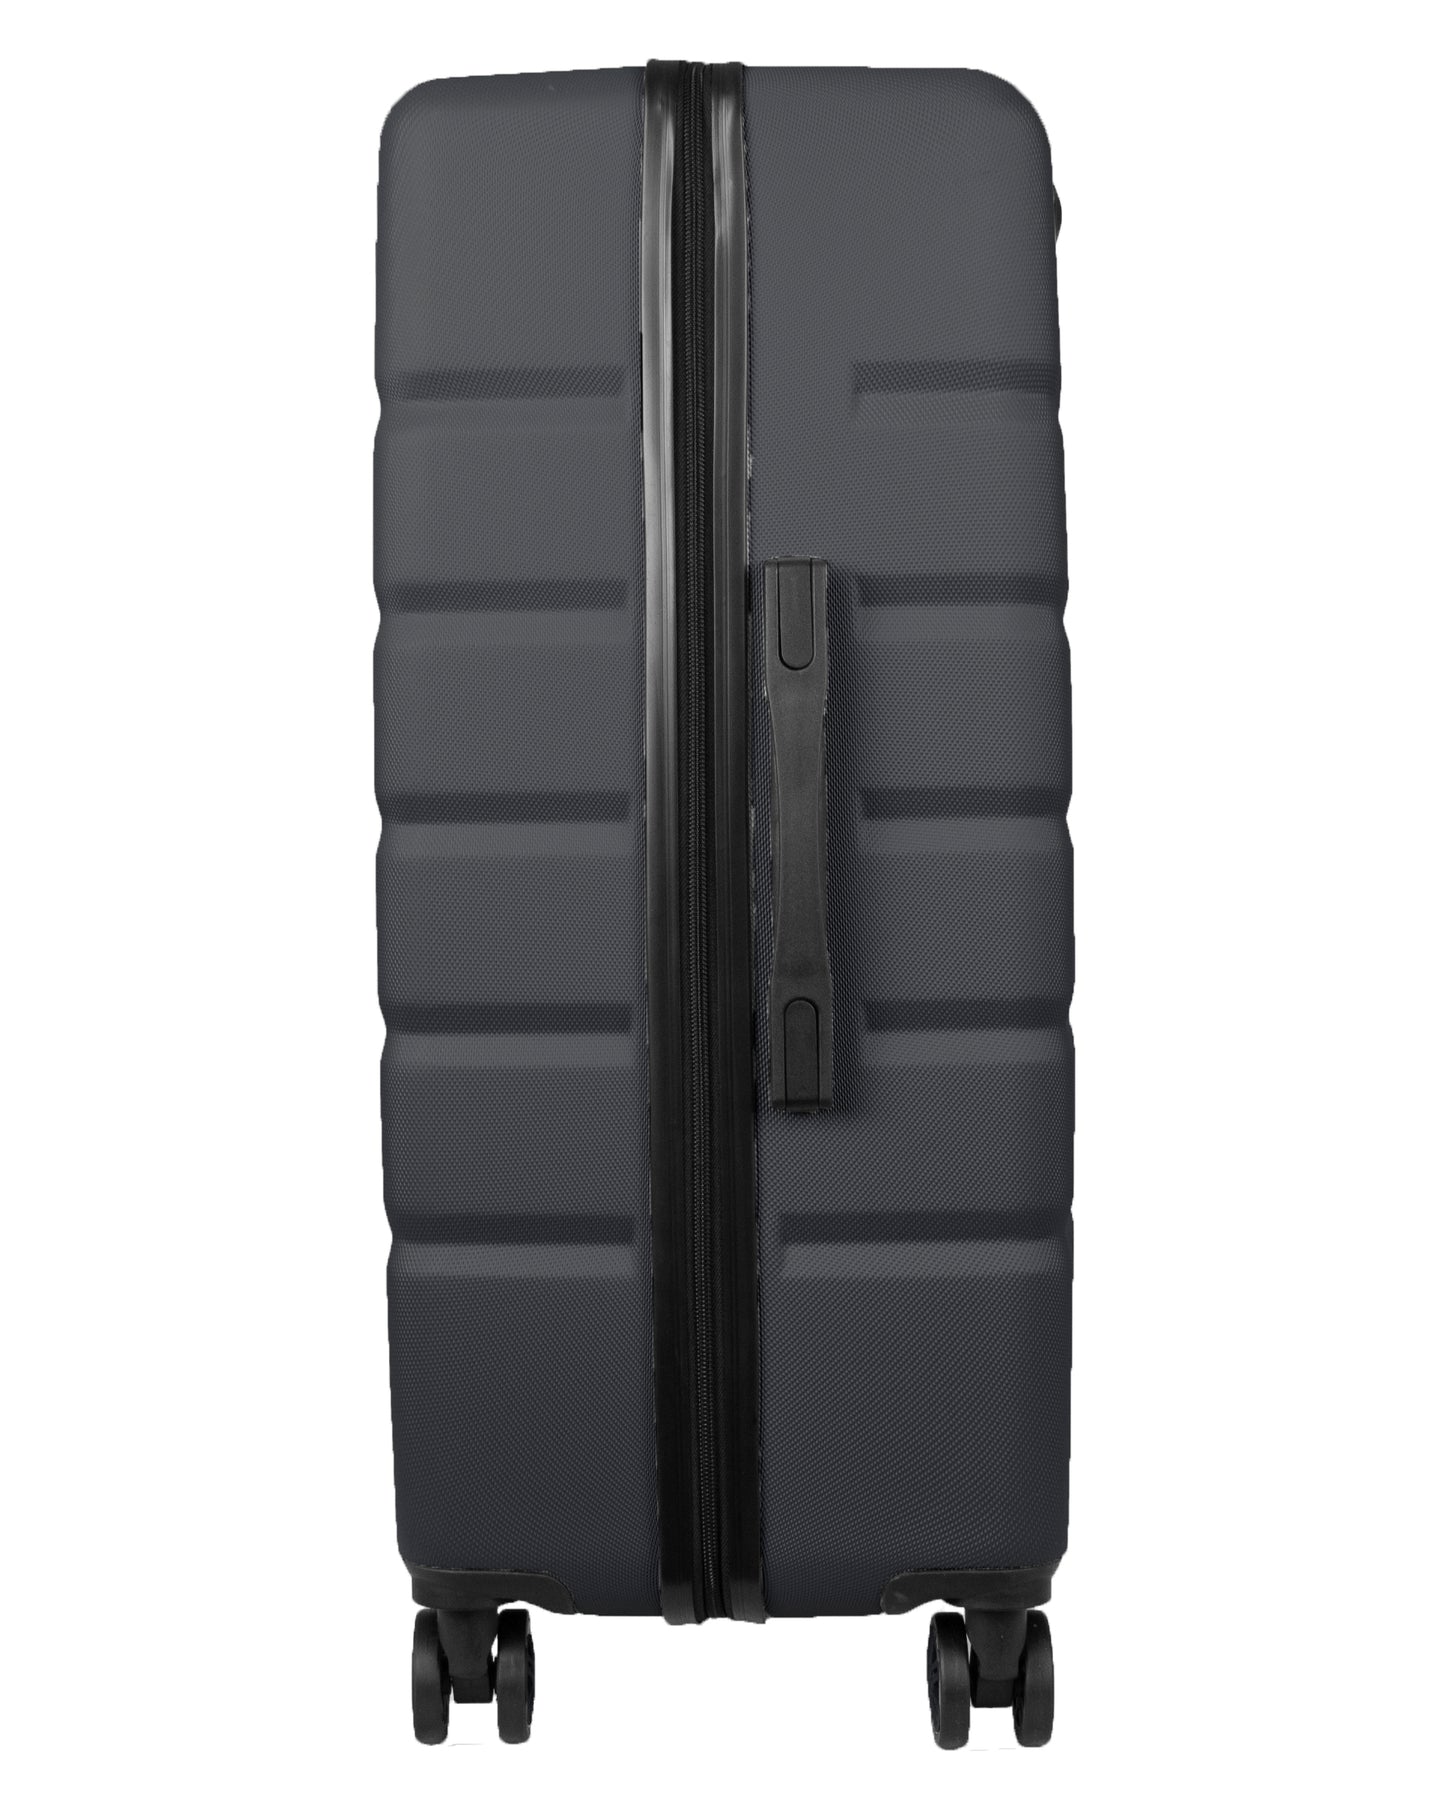 Hard Shell Luggage with 4 Spinner Wheels, Black